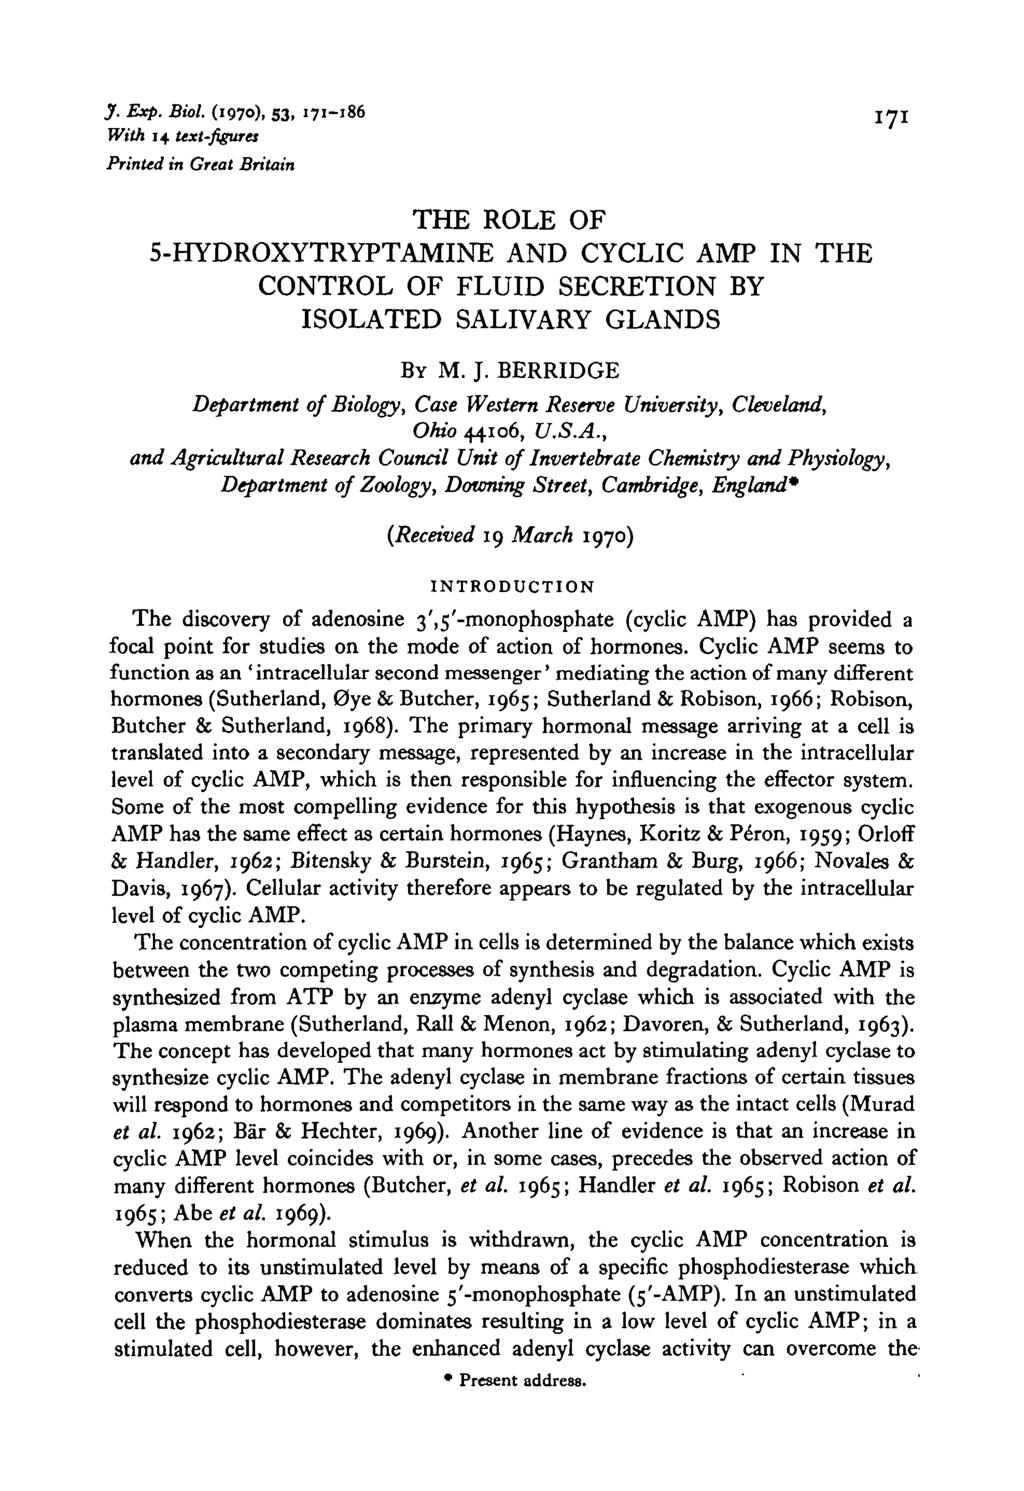 J. Exp. Biol. (1970), 53, 171-186 With 14 text-figures Printed in Great Britain THE ROLE OF 5-HYDROXYTRYPTAMINE AND CYCLIC AMP IN THE CONTROL OF FLUID SECRETION BY ISOLATED SALIVARY GLANDS BY M. J.